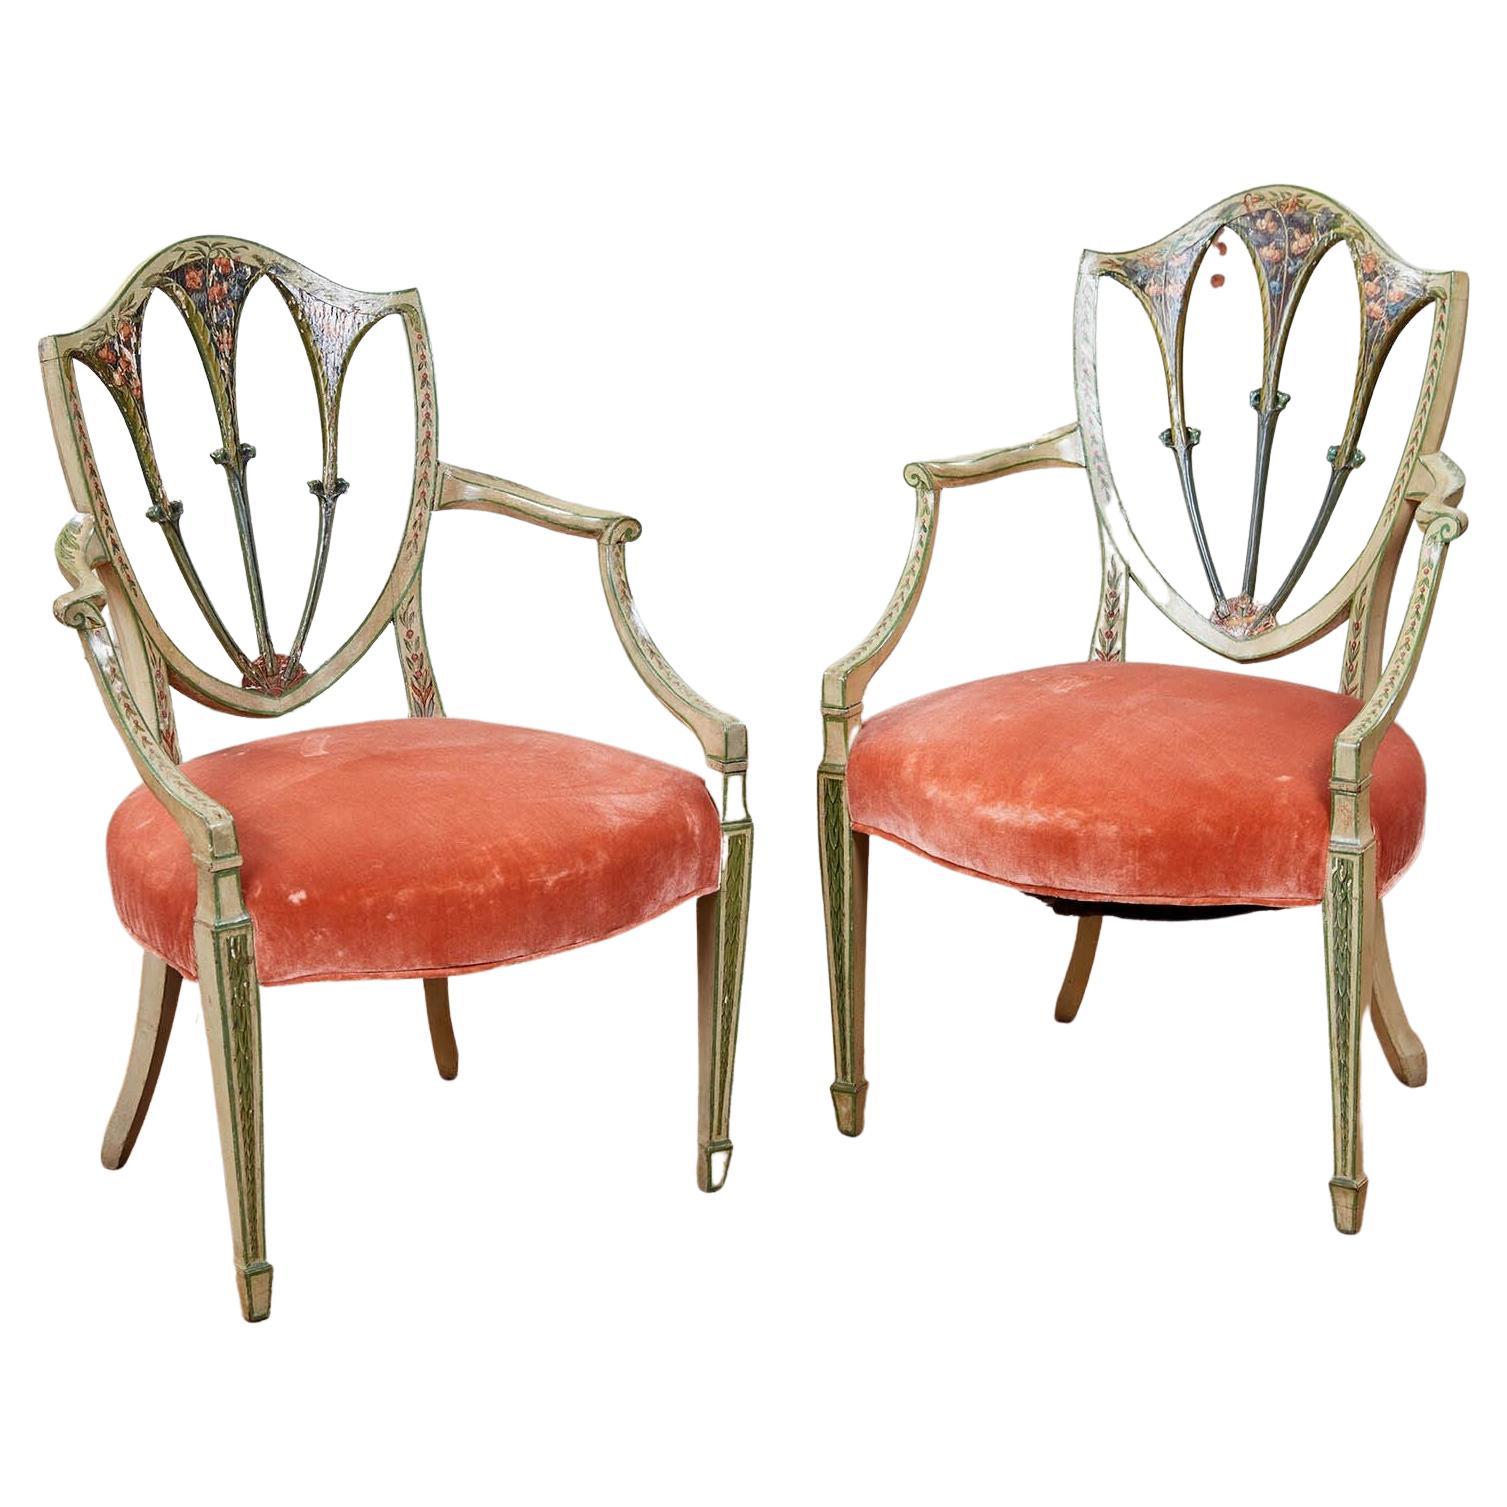 Elegant Pair of English 18th C. Painted Armchairs